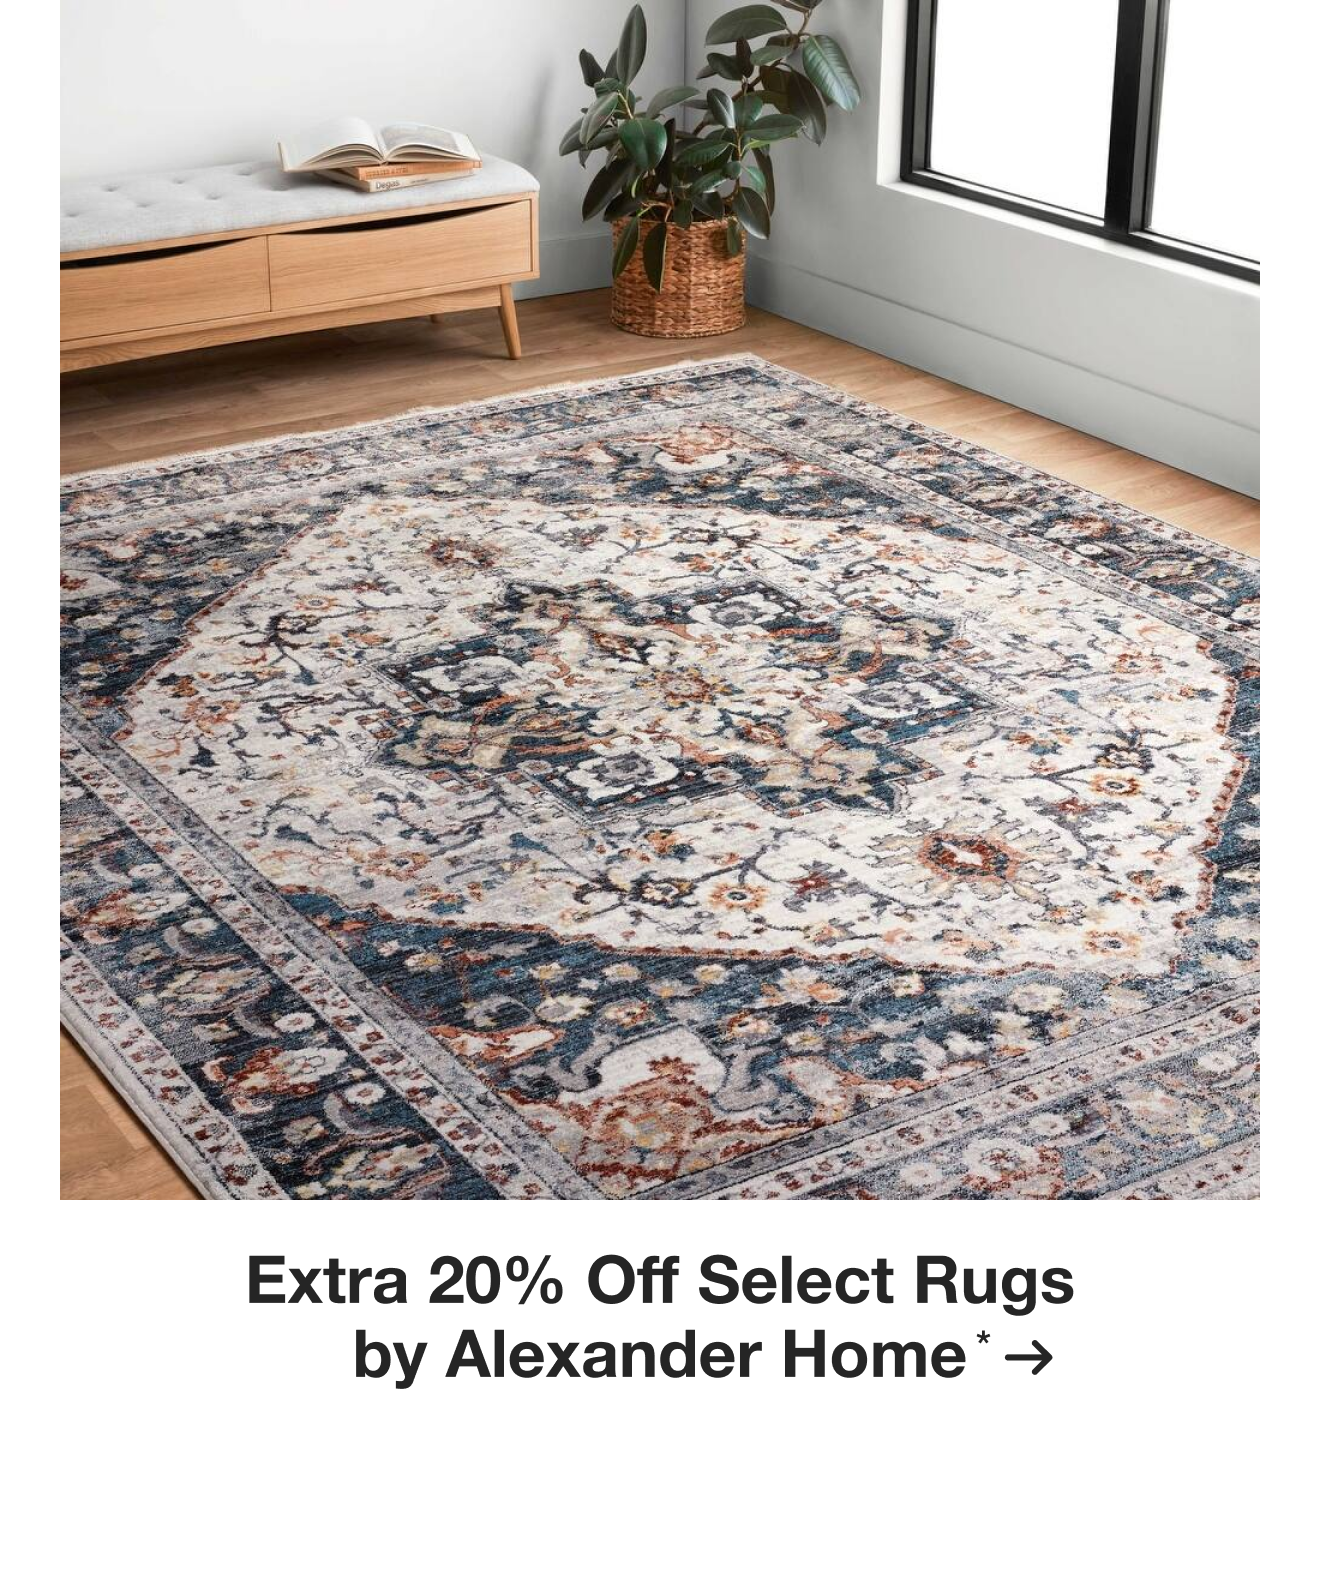 Extra 20% Off Select Rugs by Alexander Home*